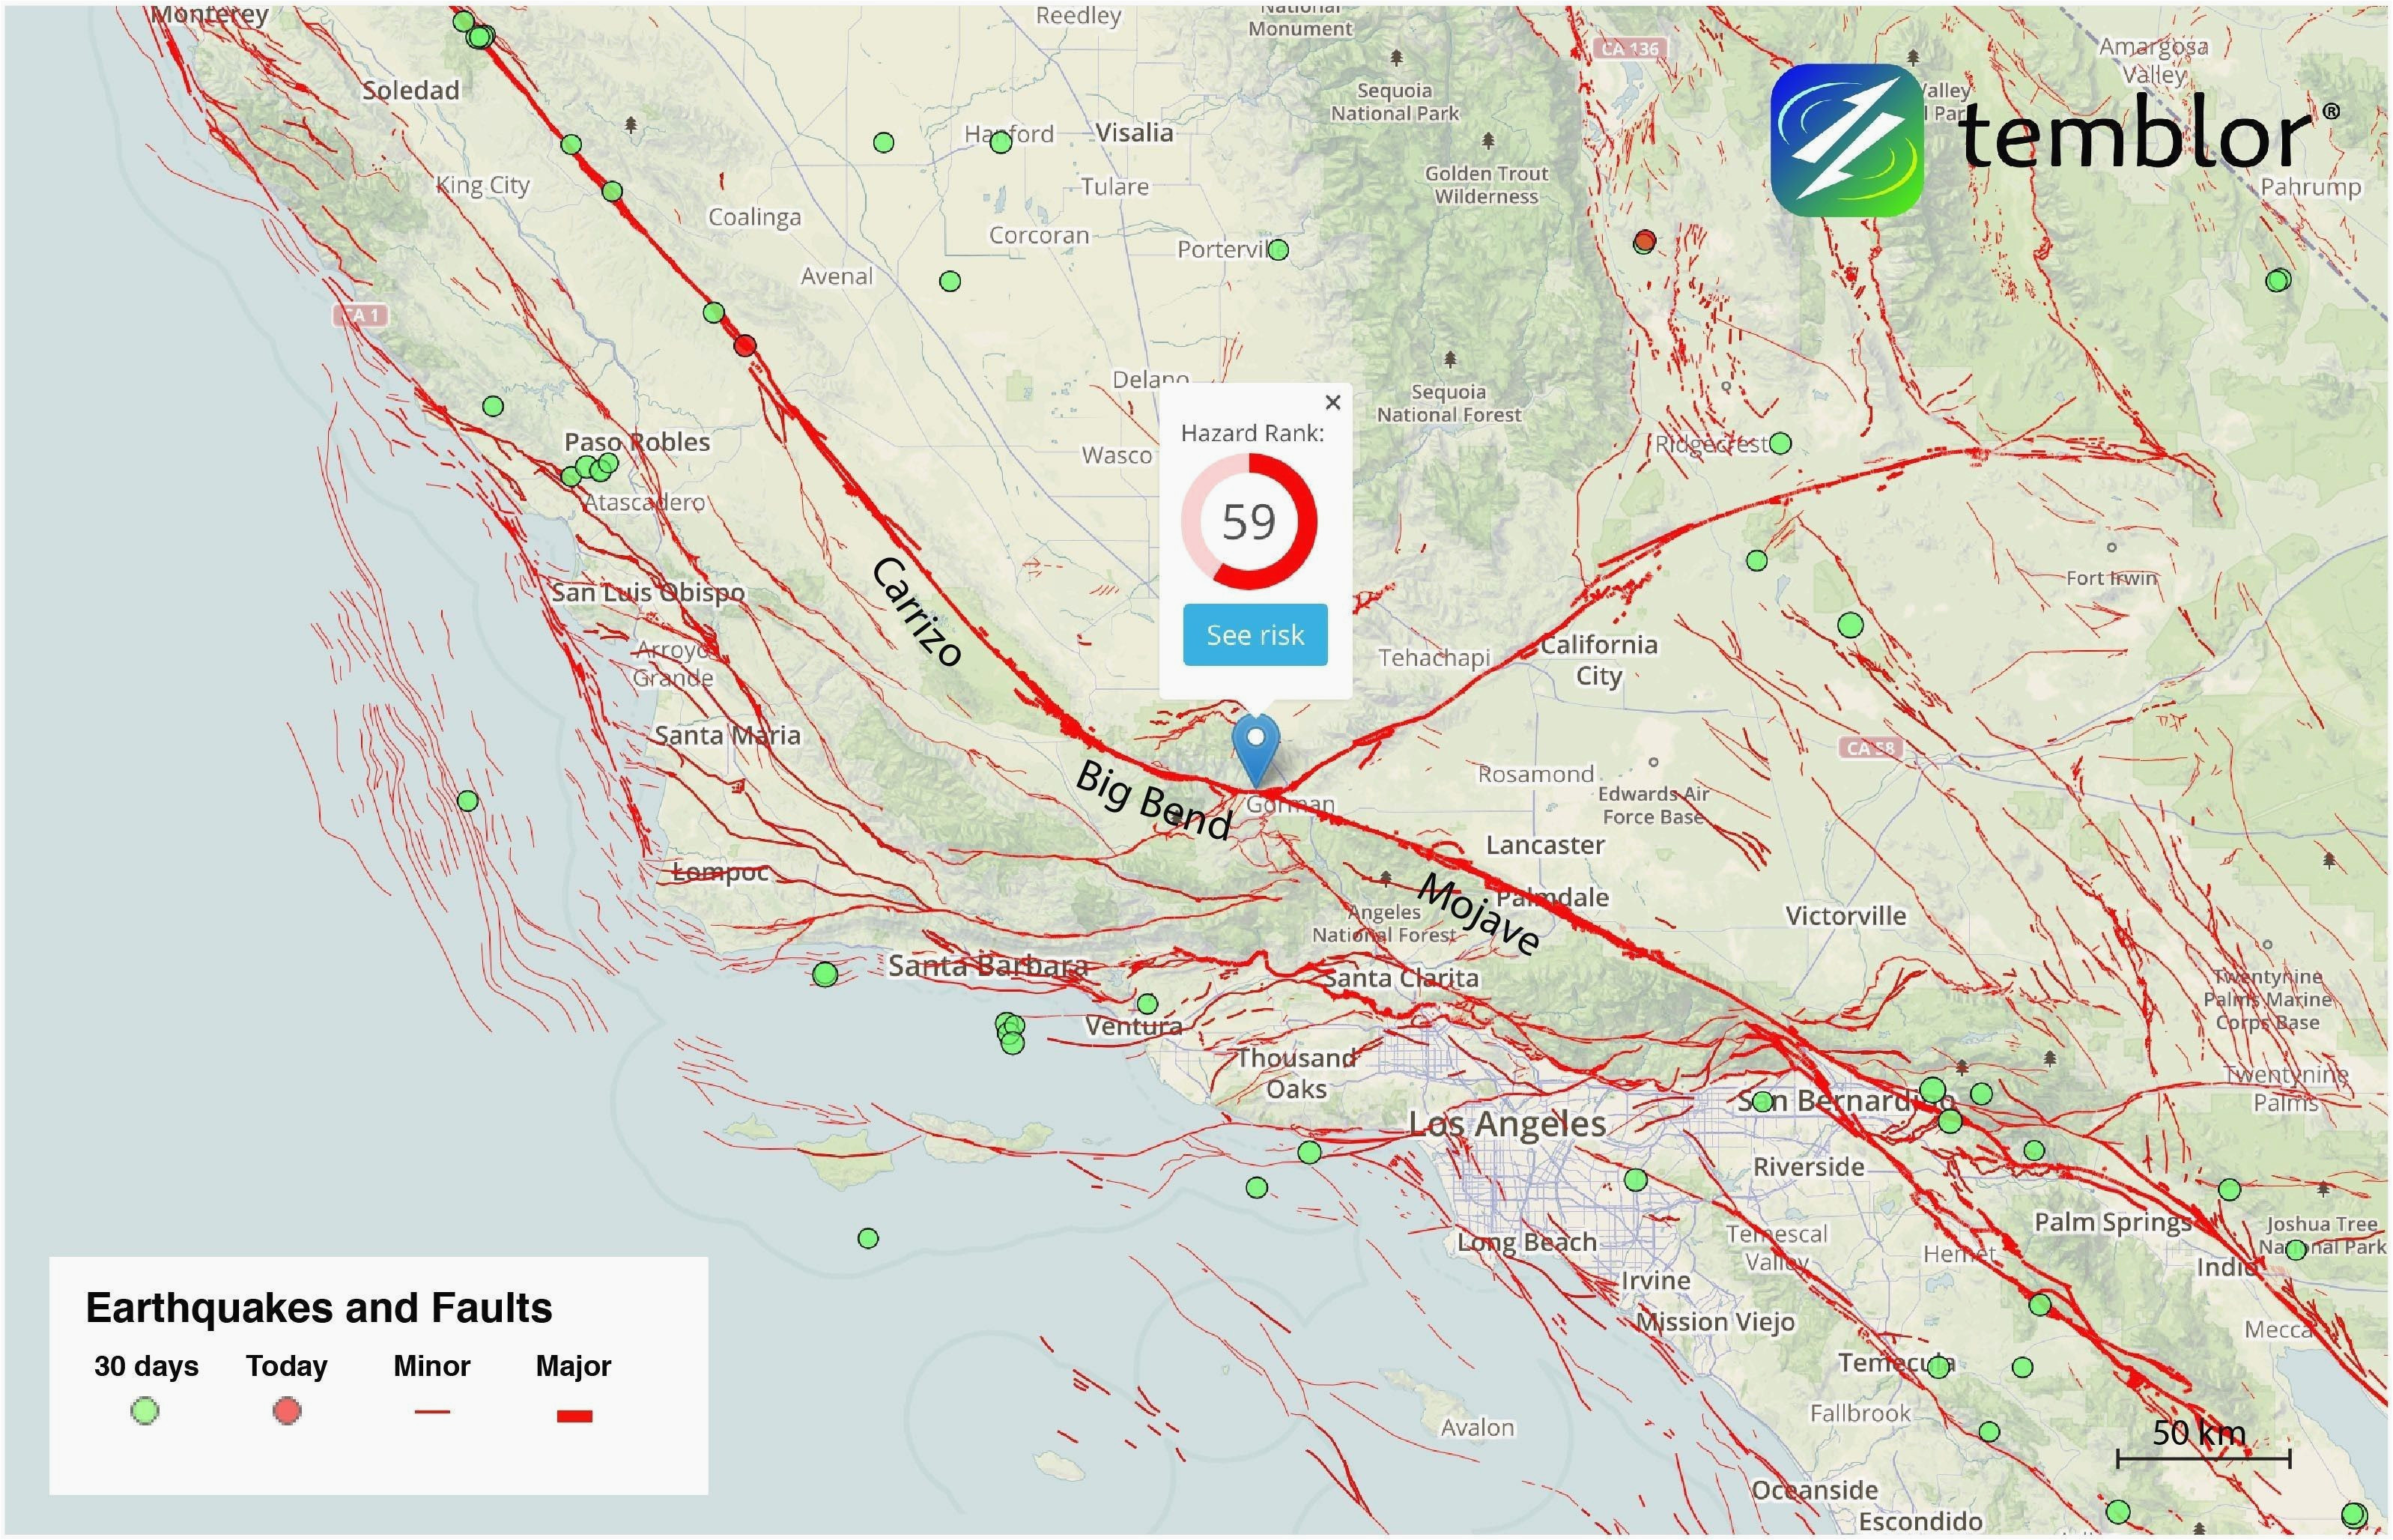 map of earthquakes in california us earthquake map awesome map